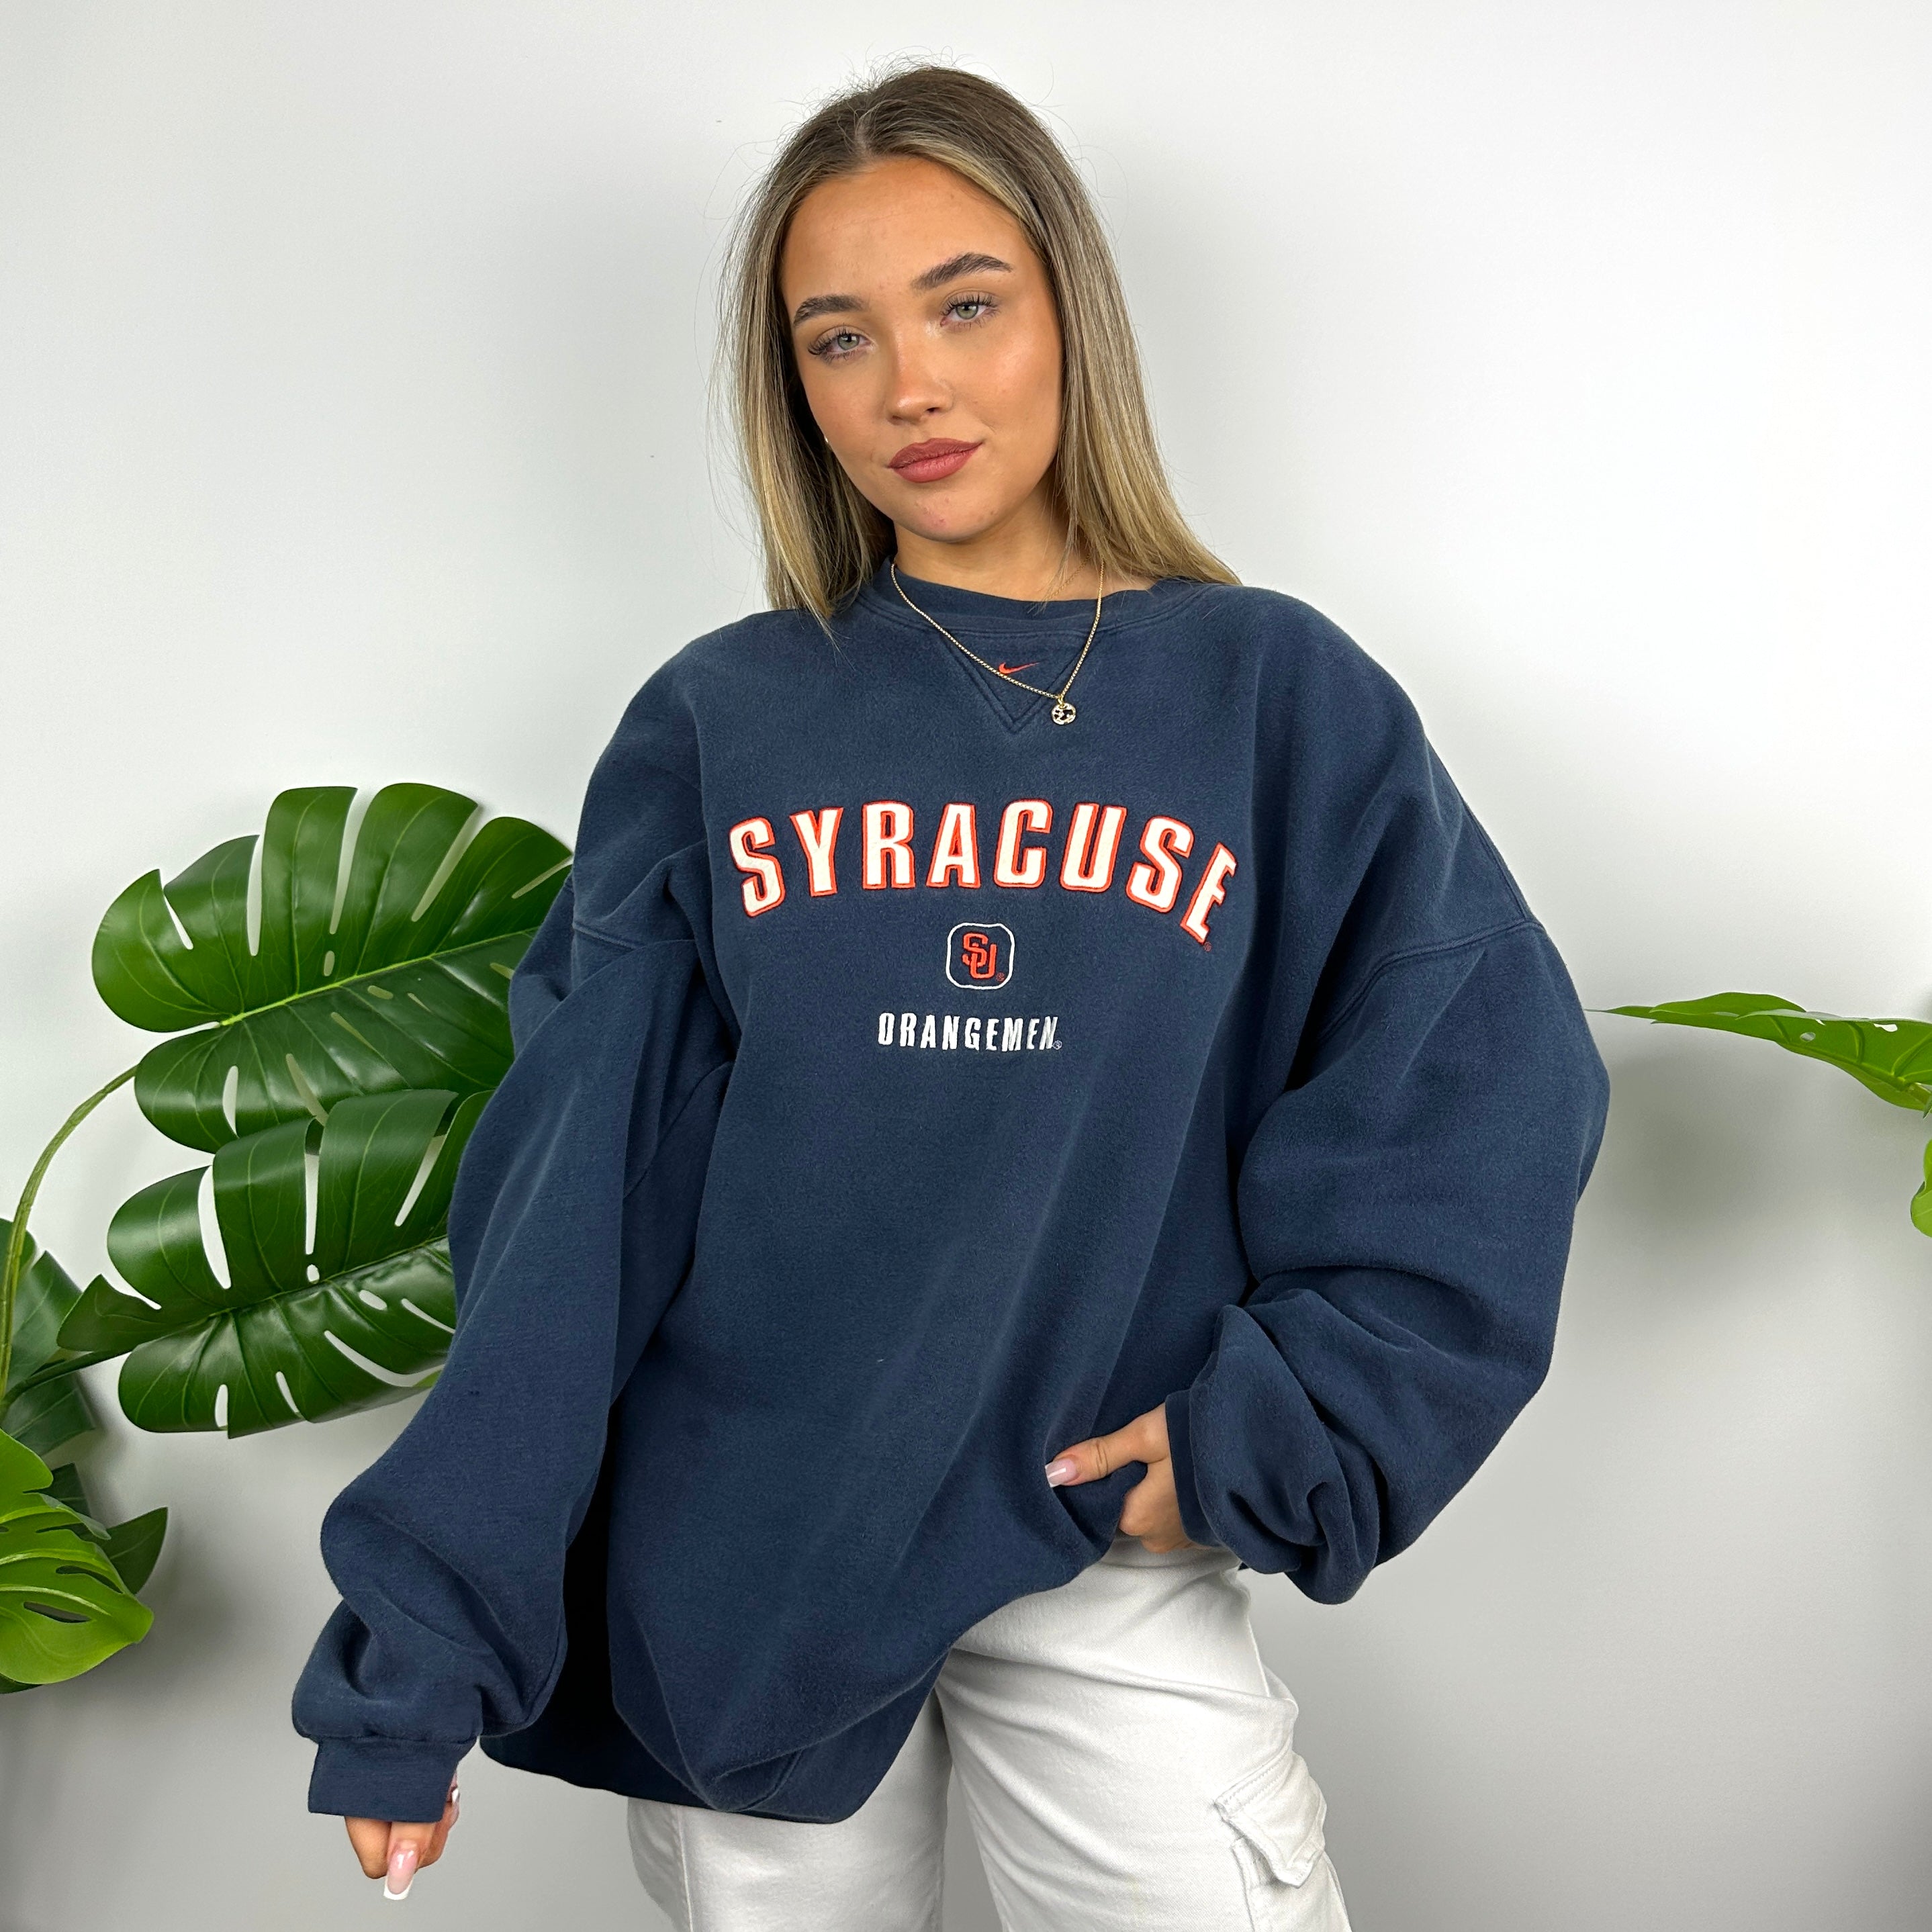 Nike x Syracuse Navy Embroidered Spell Out Sweatshirt (XXL)